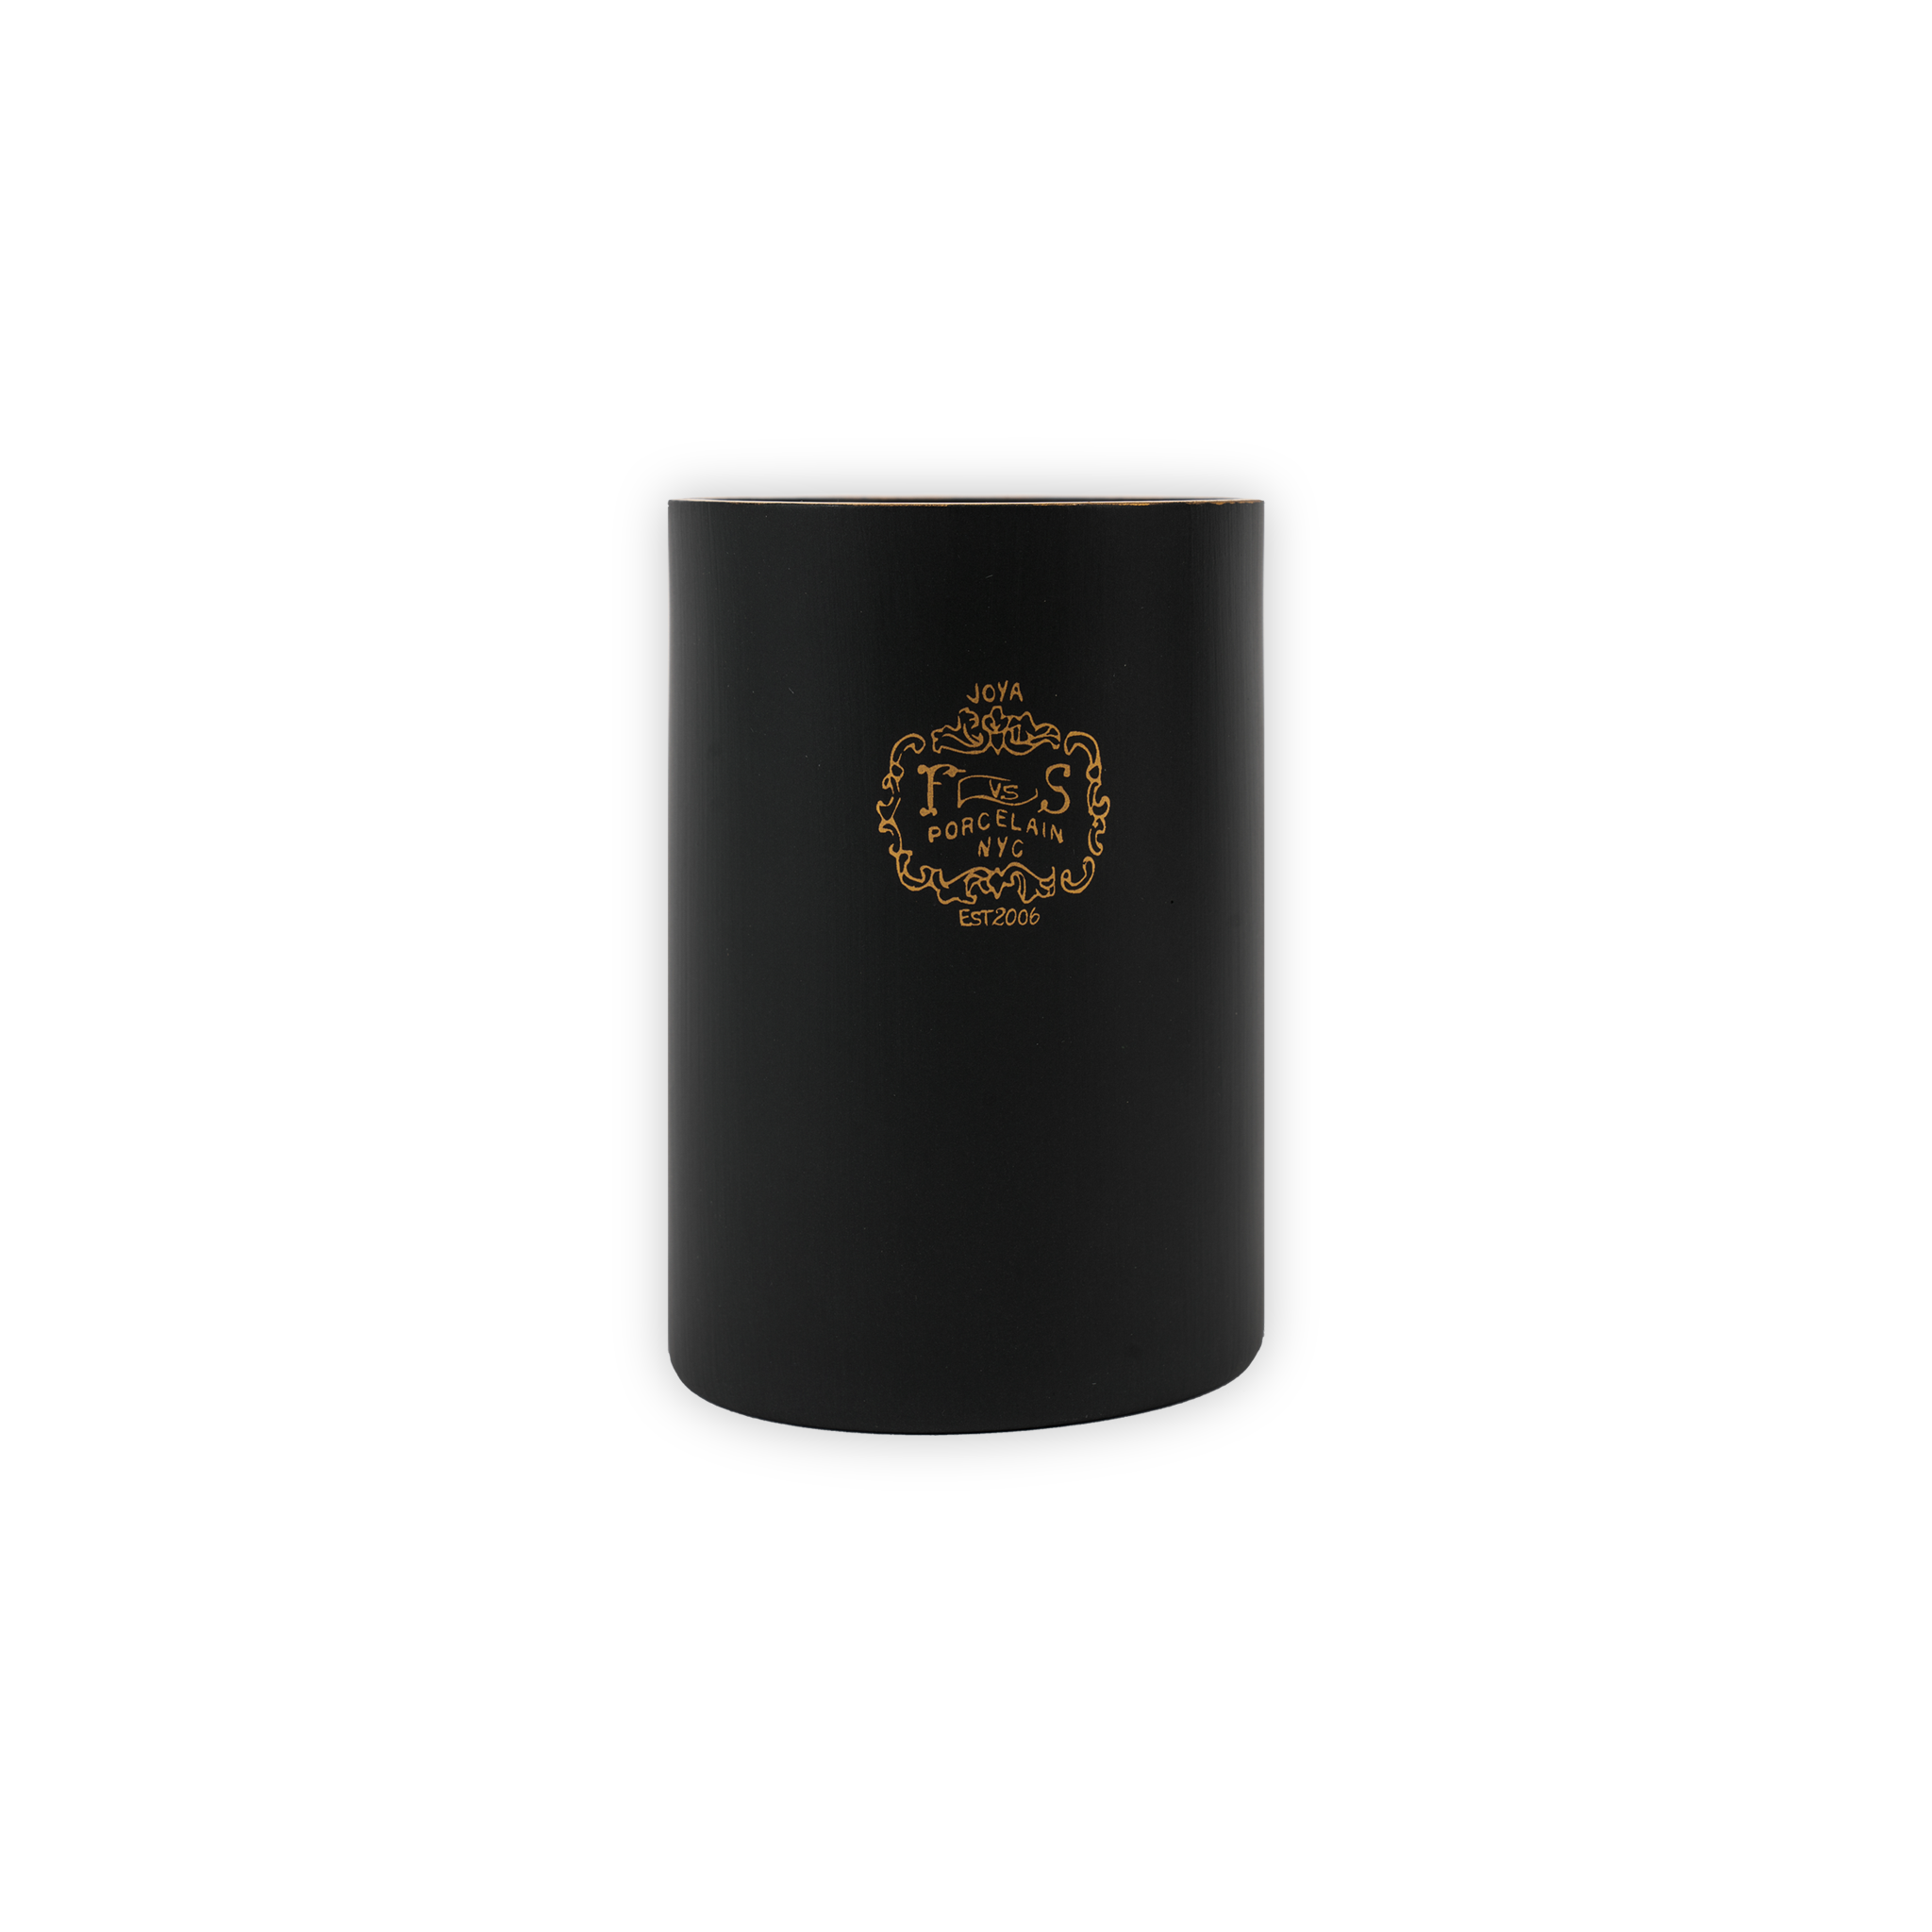 A black ceramic glass for the Composition No. 6 candle. On the front in gold lettering reads "F vs S Porcelain NYC. Est. 2006"